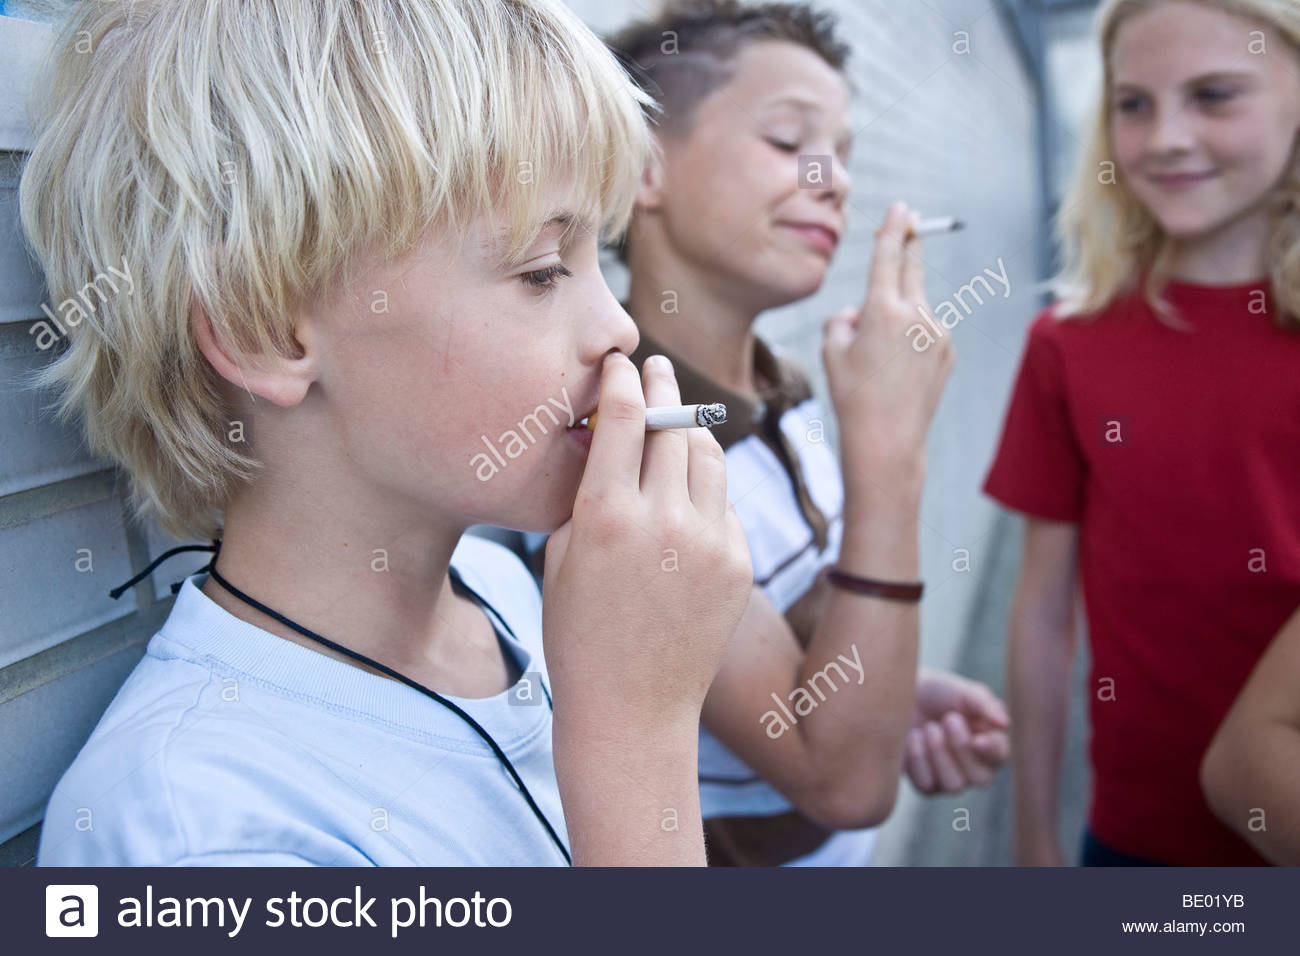 two-young-boys-smoking-a-cigarette-a-girl-watching-BE01YB.jpg